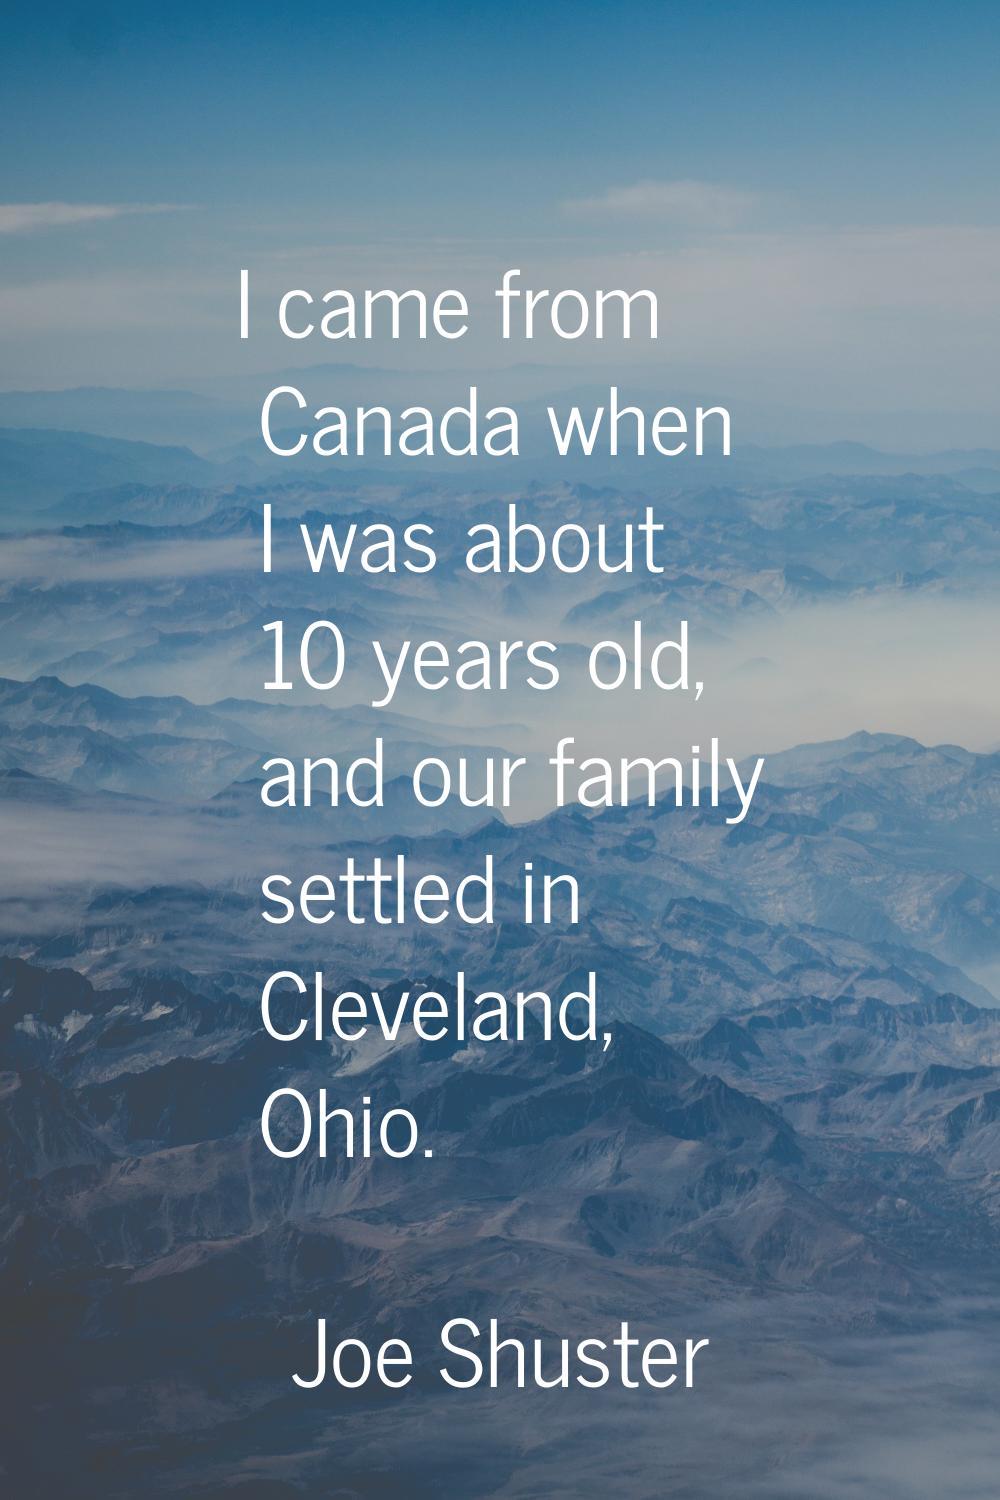 I came from Canada when I was about 10 years old, and our family settled in Cleveland, Ohio.